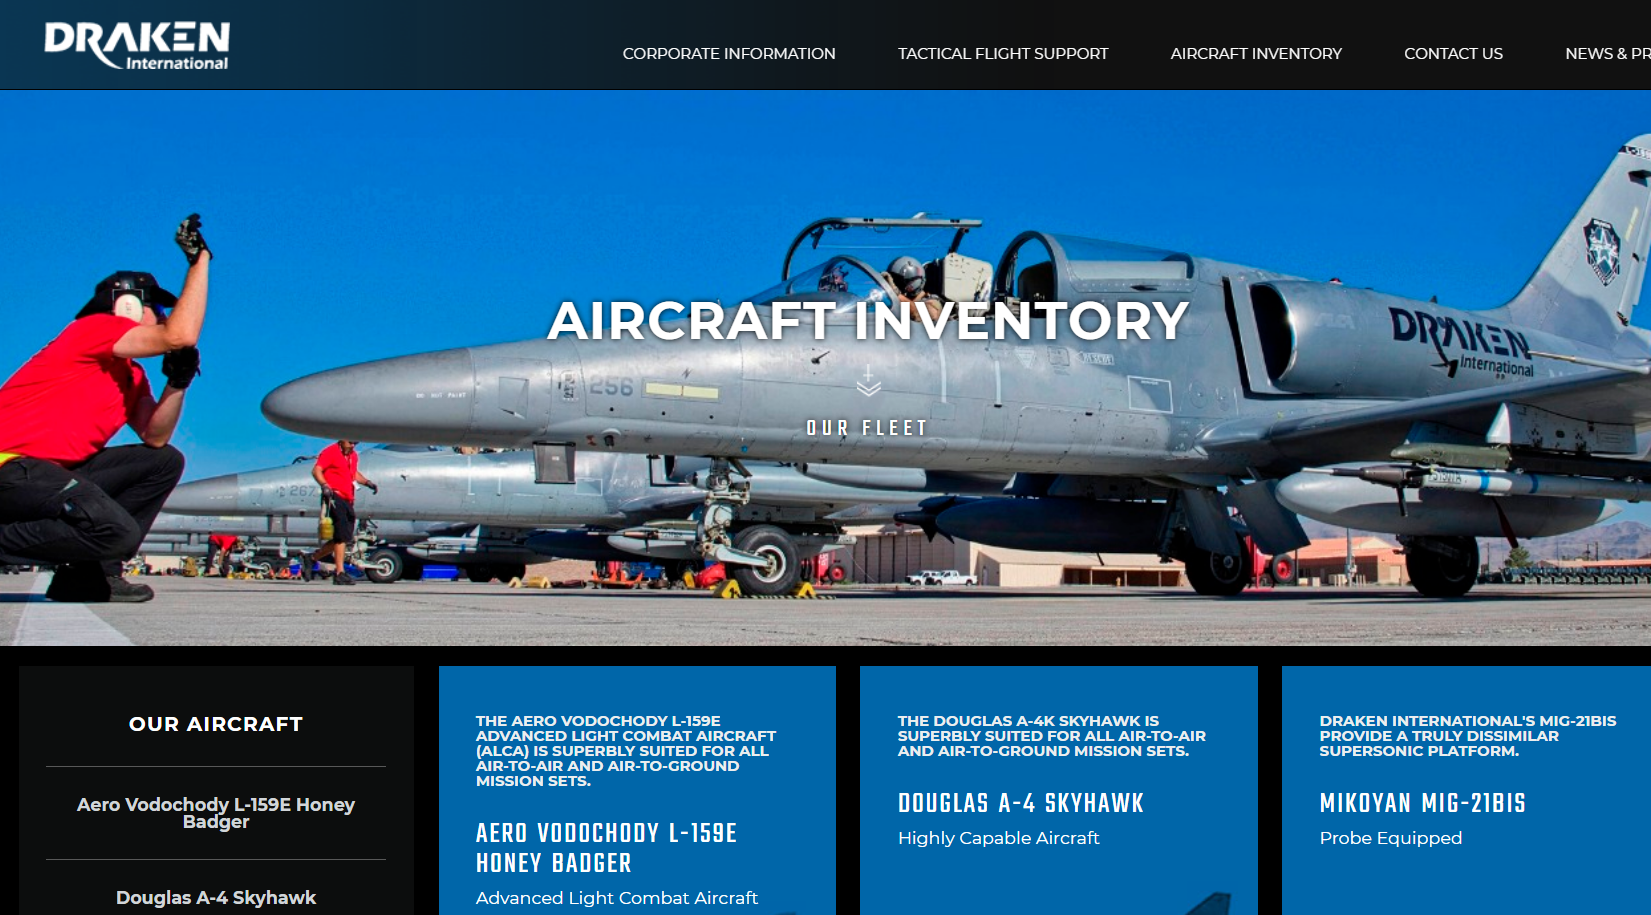 EXCLUSIVE: Private company offering “contract air support” using military jet fighters located in Lakeland, FL where live air-to-air missile was just found